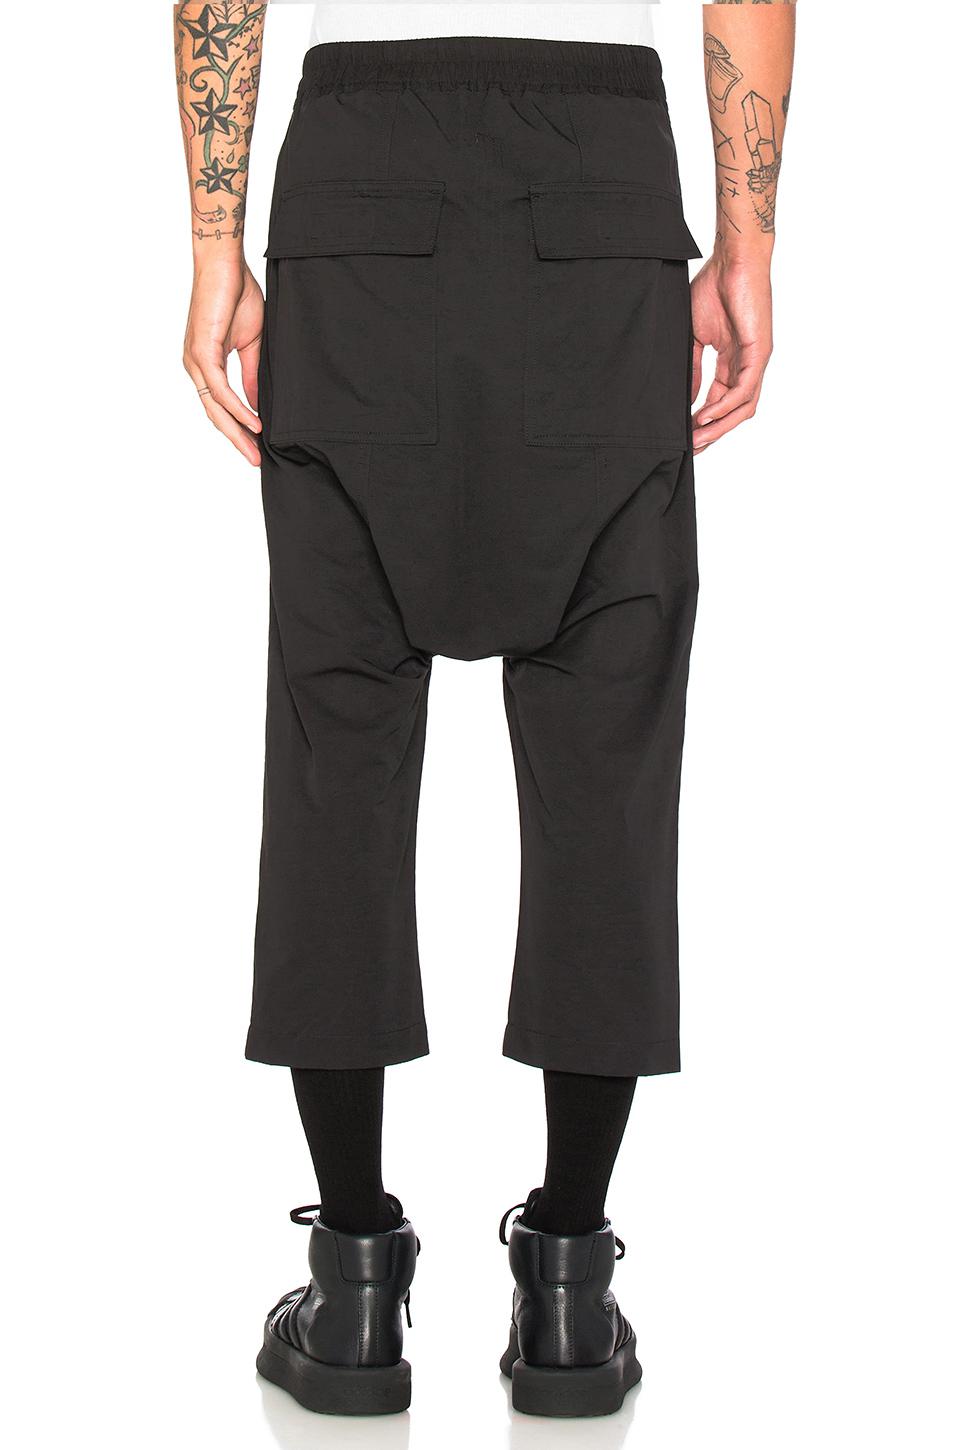 Lyst - DRKSHDW by Rick Owens Cropped Sweatpant in Black for Men